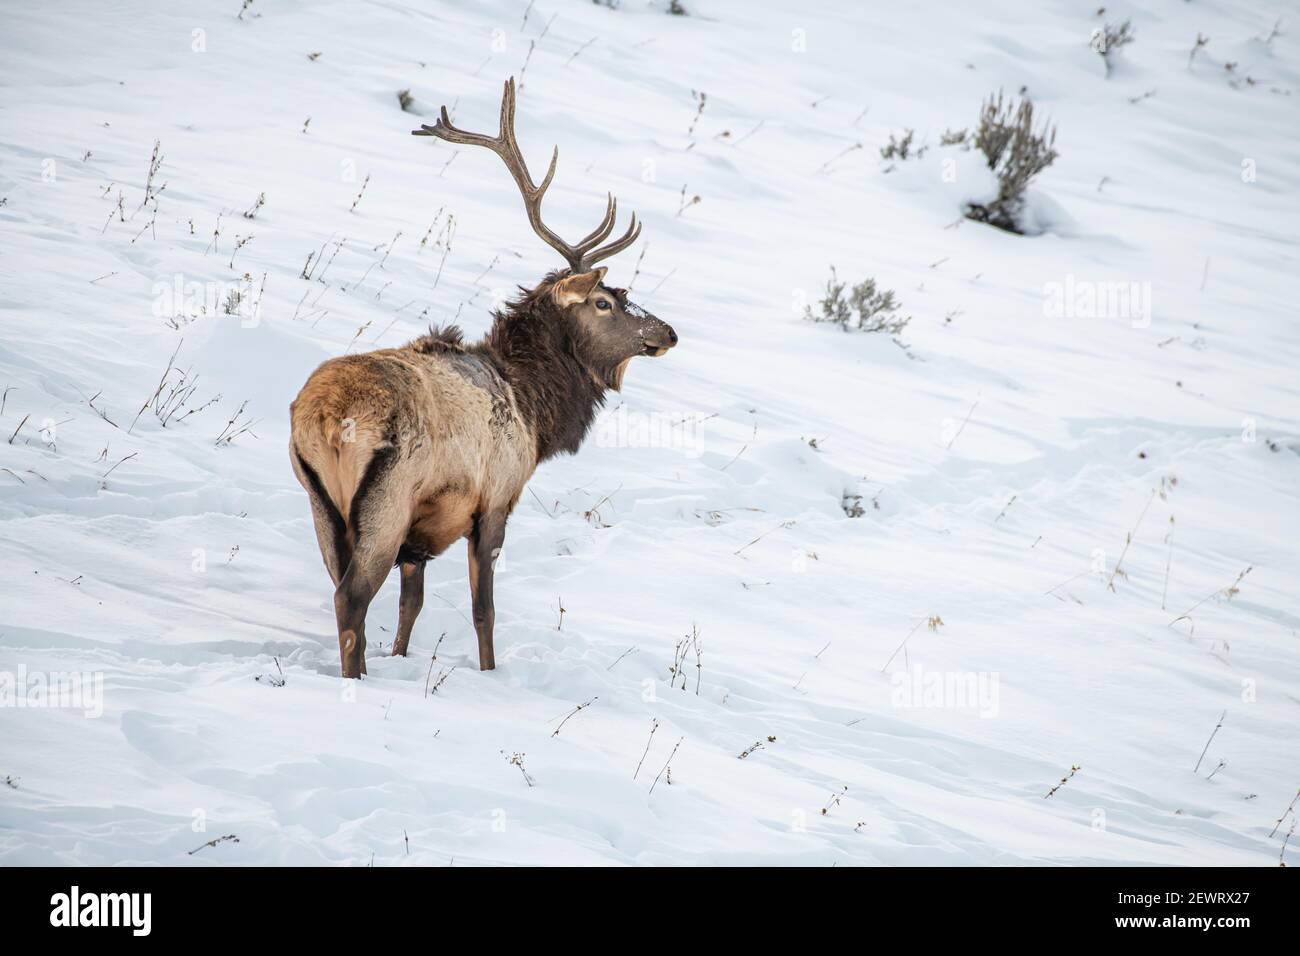 Bull elk (Cervus canadensis), in the snow, Yellowstone National Park, UNESCO World Heritage Site, Wyoming, United States of America, North America Stock Photo